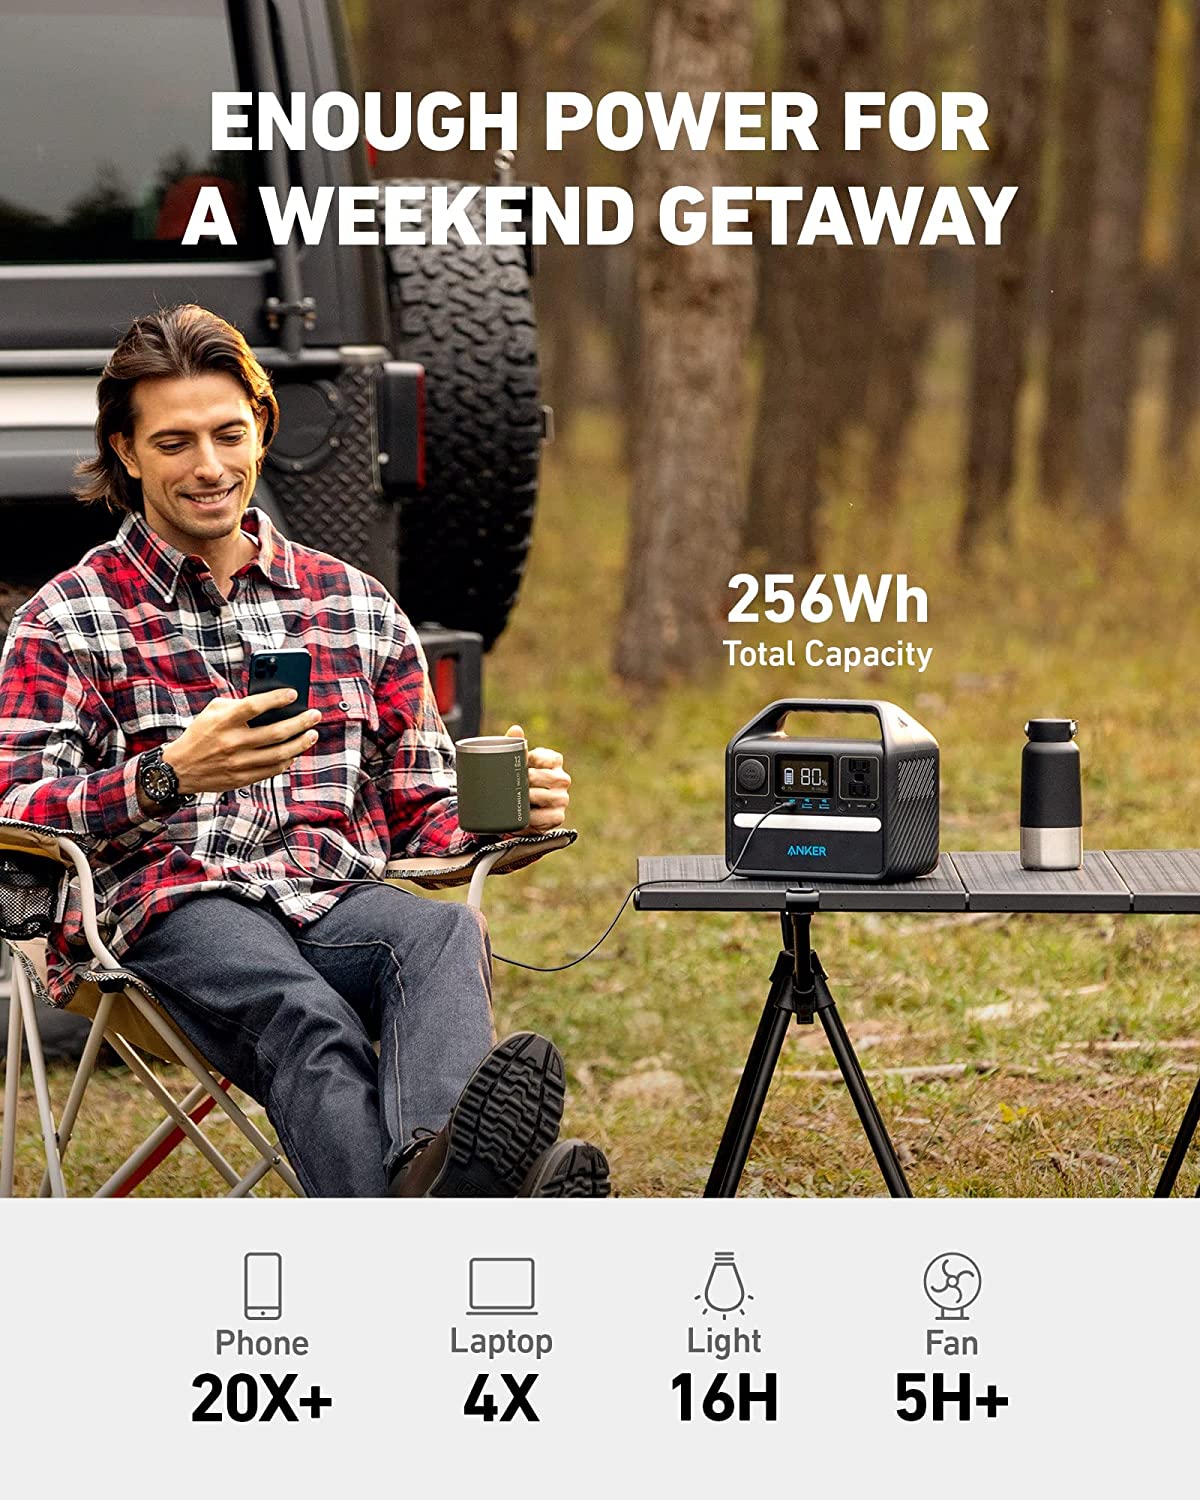 The Anker Solar Generator 521 Has Enough Power For A Weekend Getaway